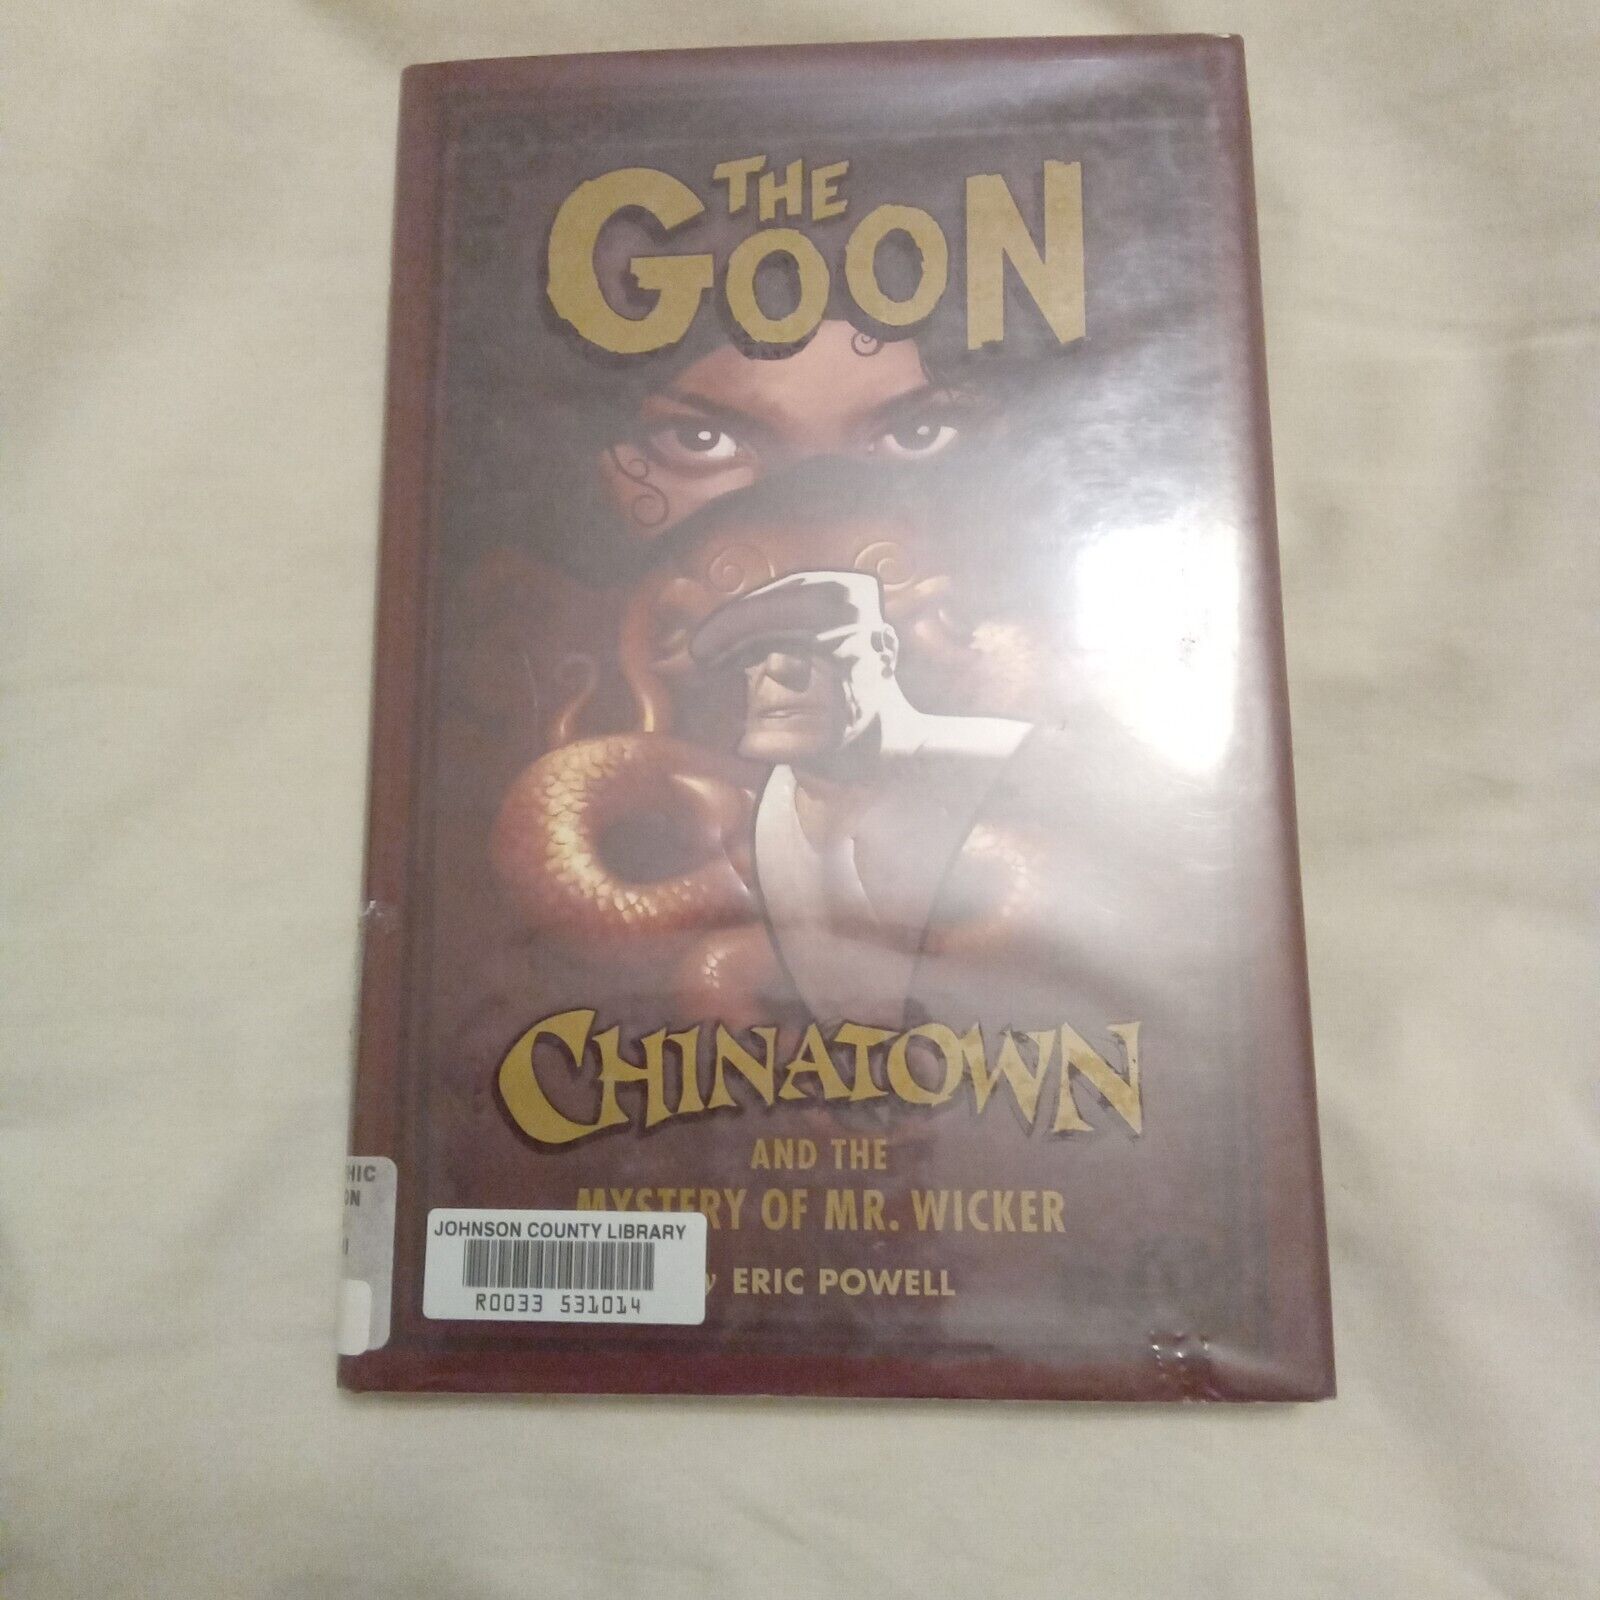 The Goon: Chinatown and the Mystery of Mr. Wicker Hardcover